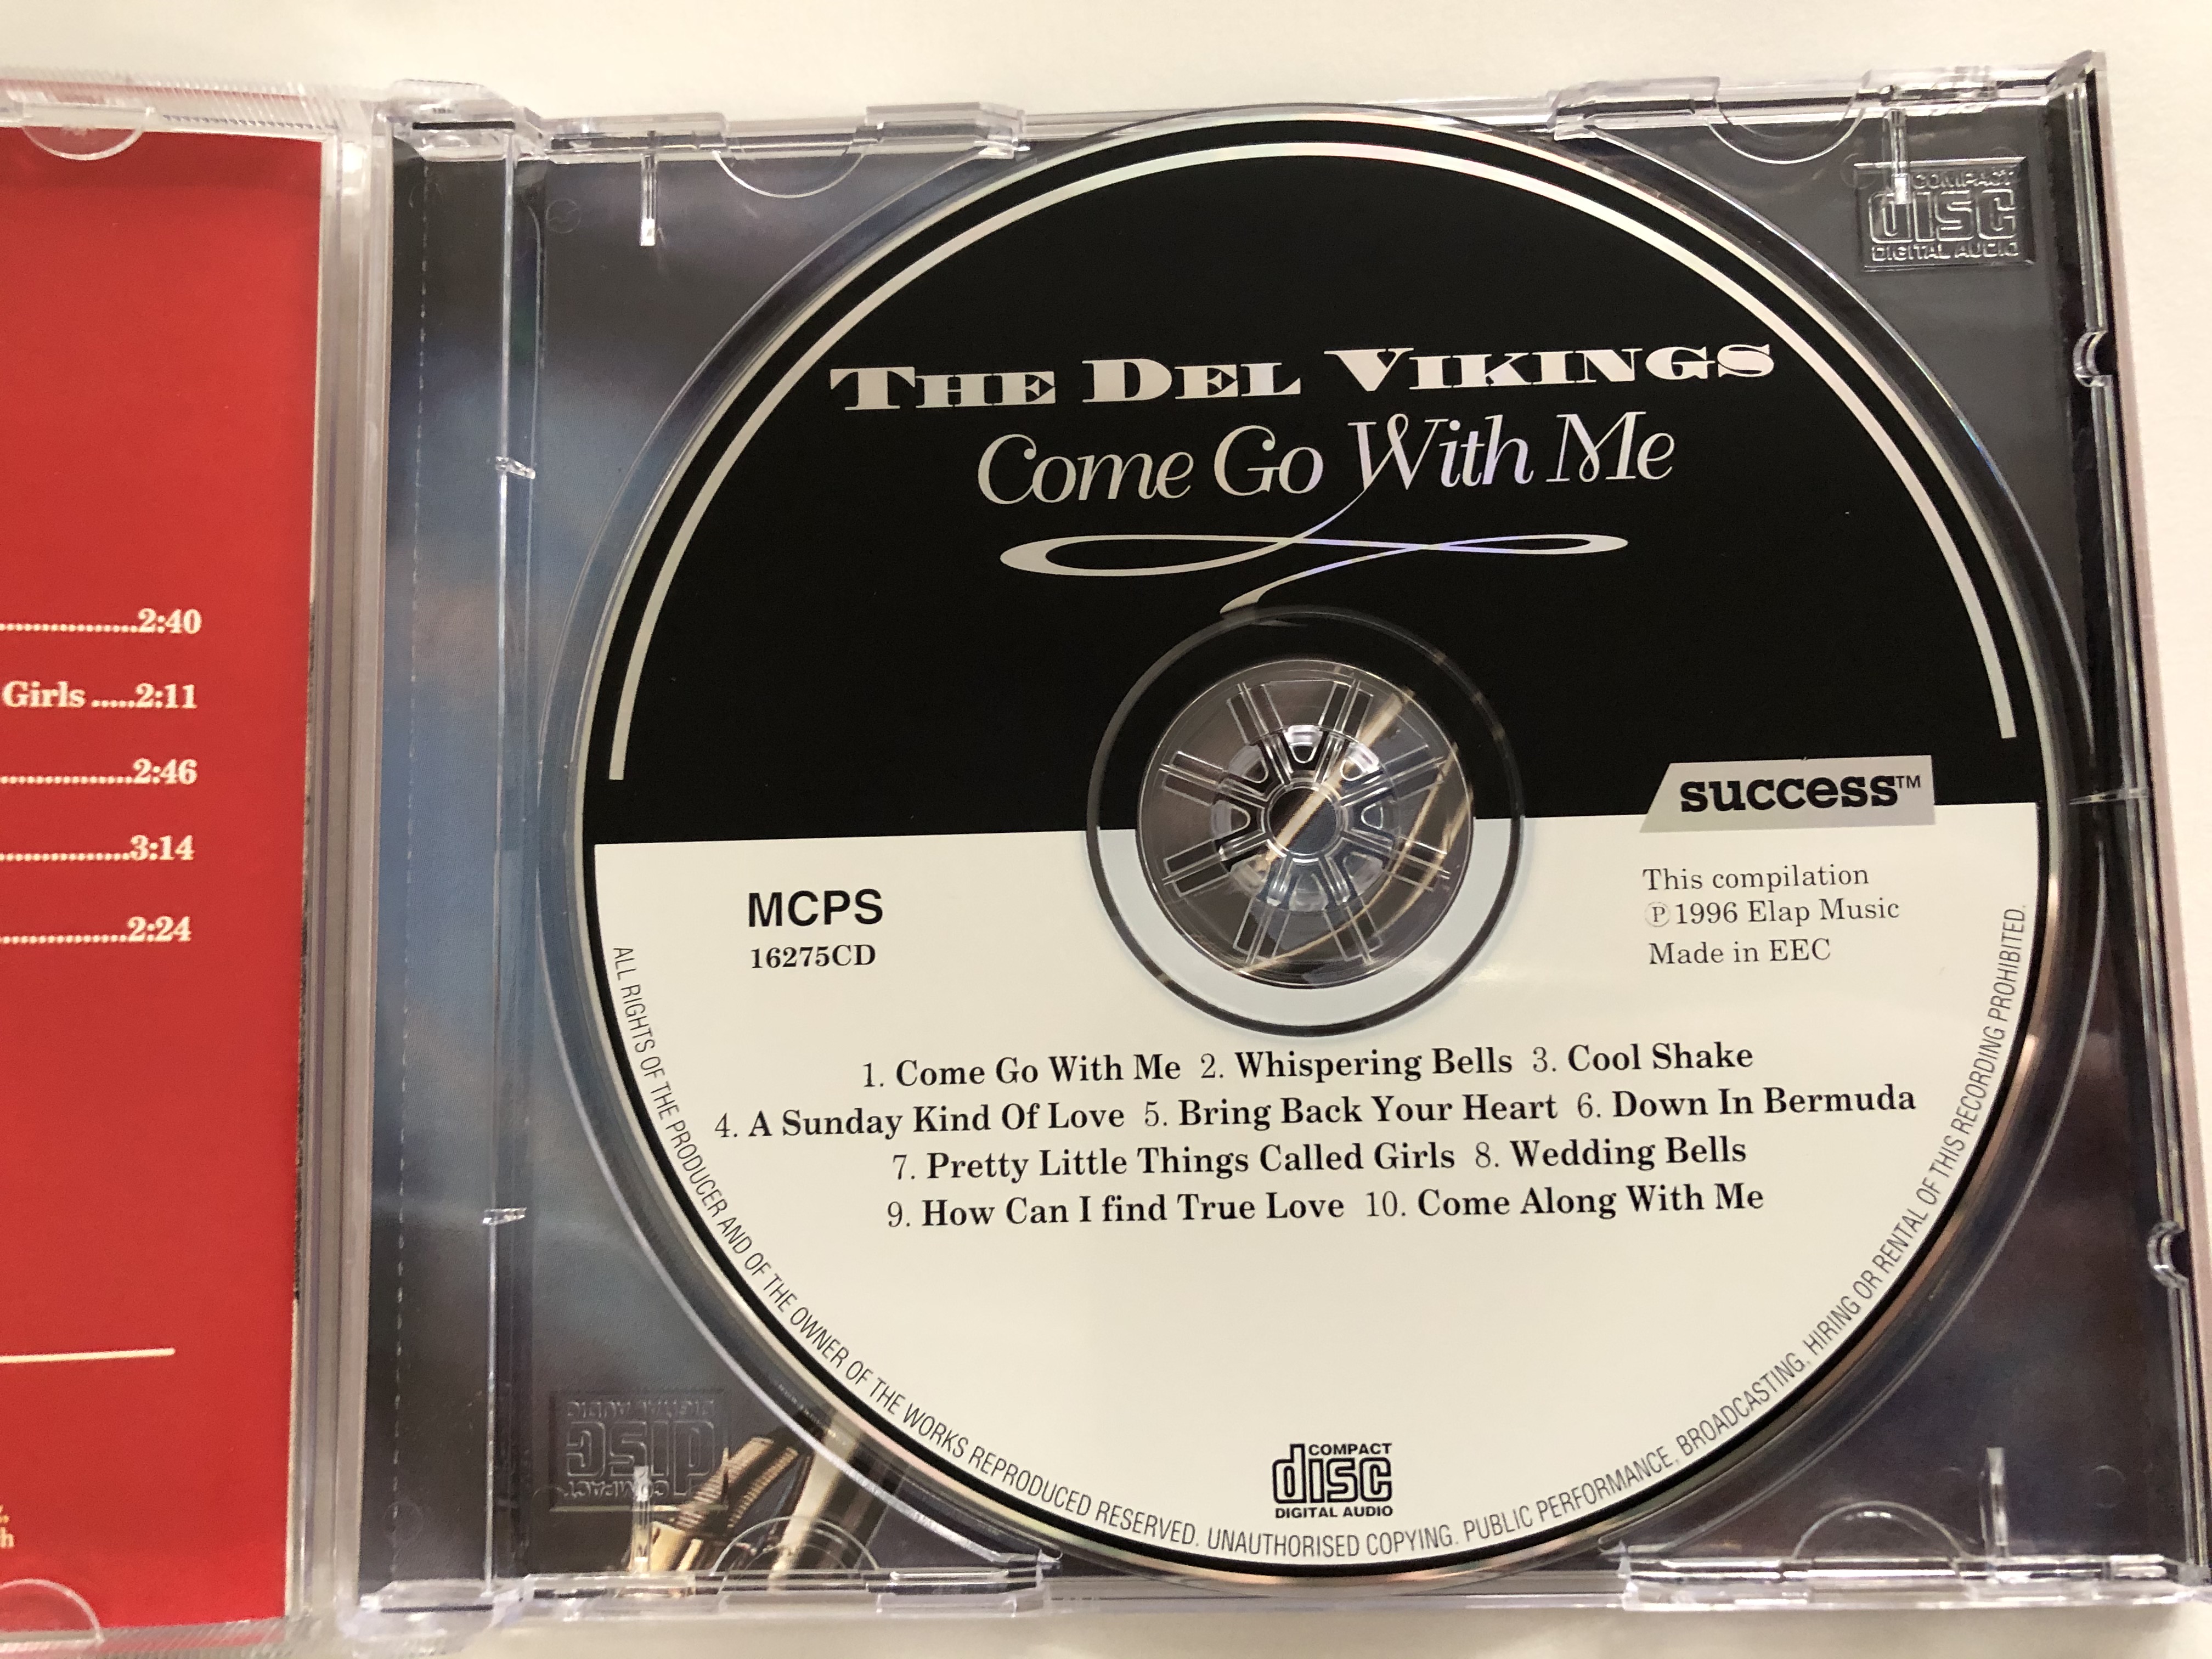 the-dell-vikings-come-go-with-me-biographical-details-on-the-back-elap-music-audio-cd-1996-16275-cd-3-.jpg